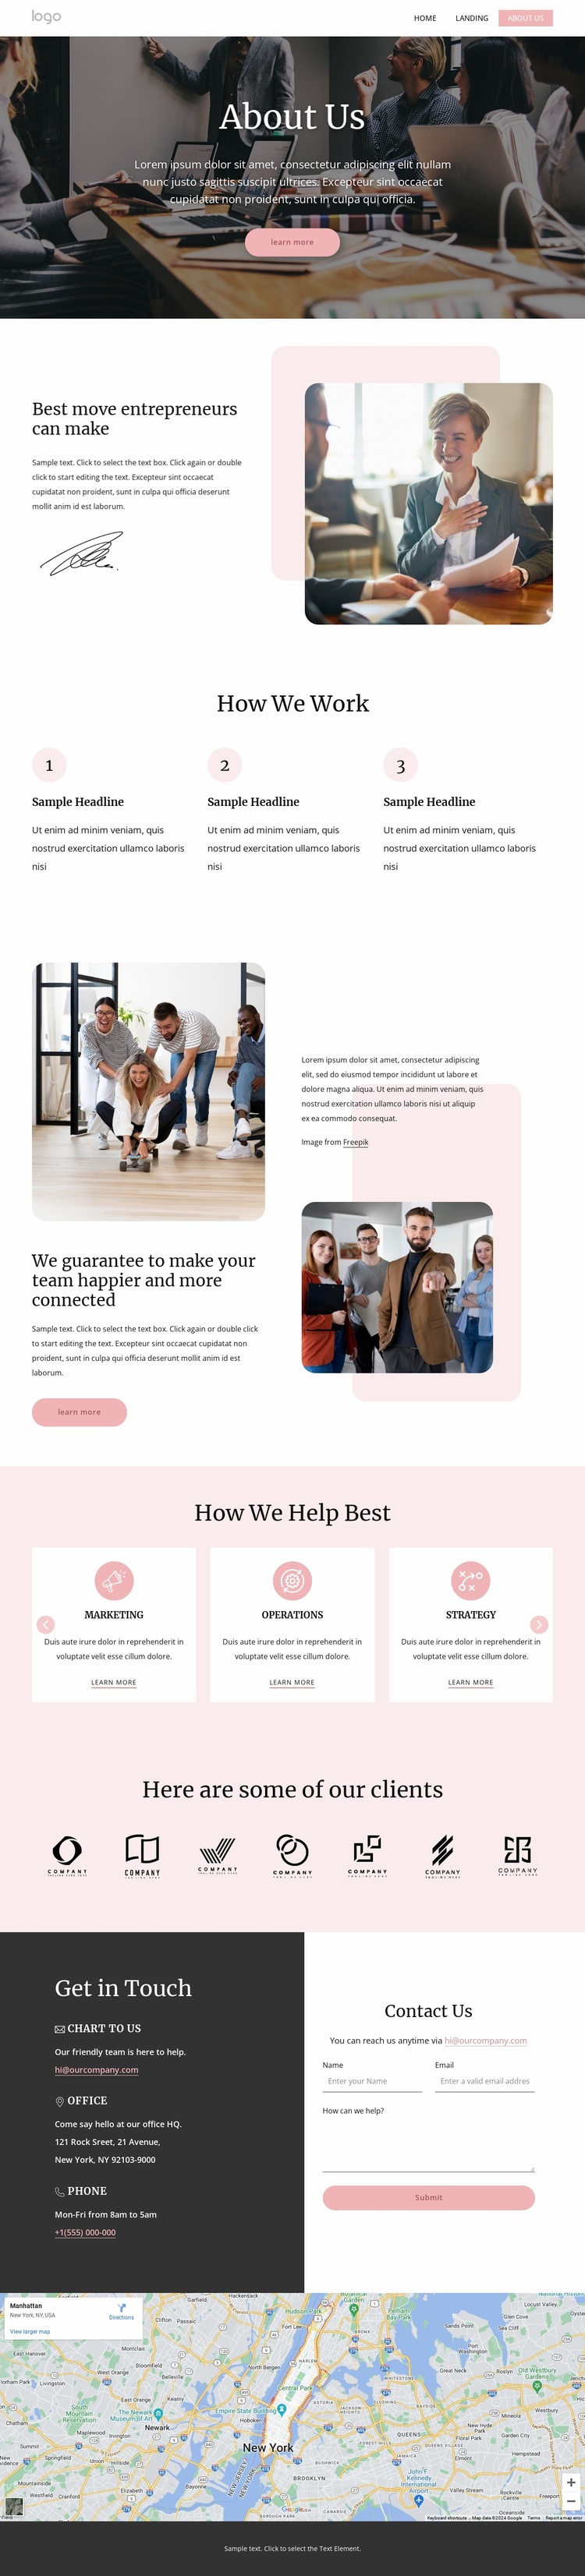 Team building expertise Landing Page